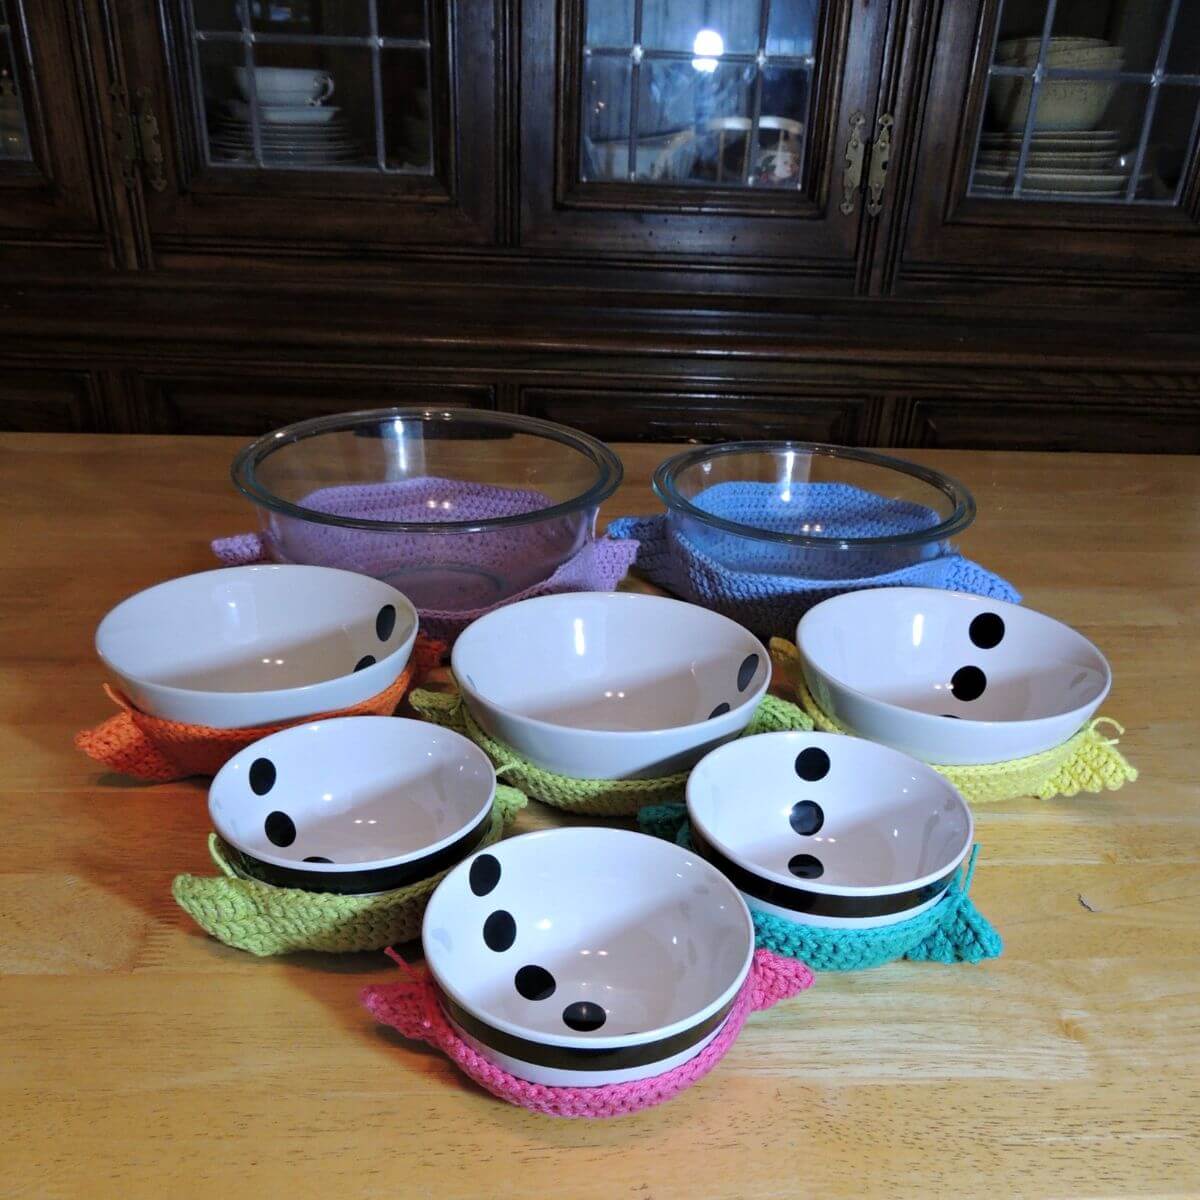 Image of several bowls in crochet bowl cozies of various colors.